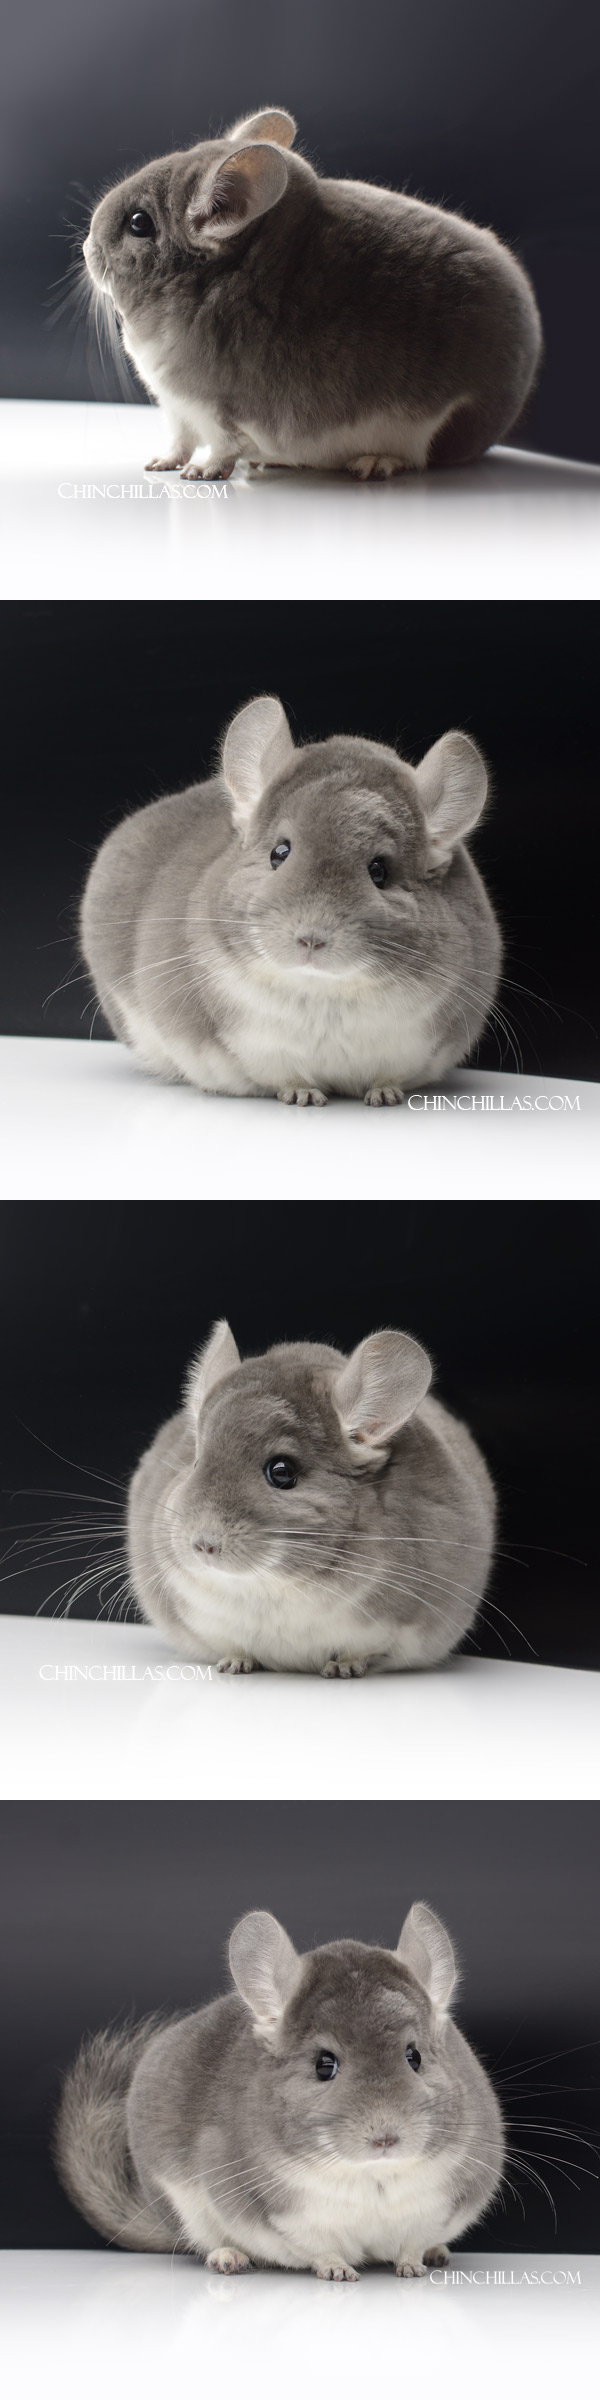 Chinchilla or related item offered for sale or export on Chinchillas.com - 24049 Large Premium Production Quality Violet Female Chinchilla